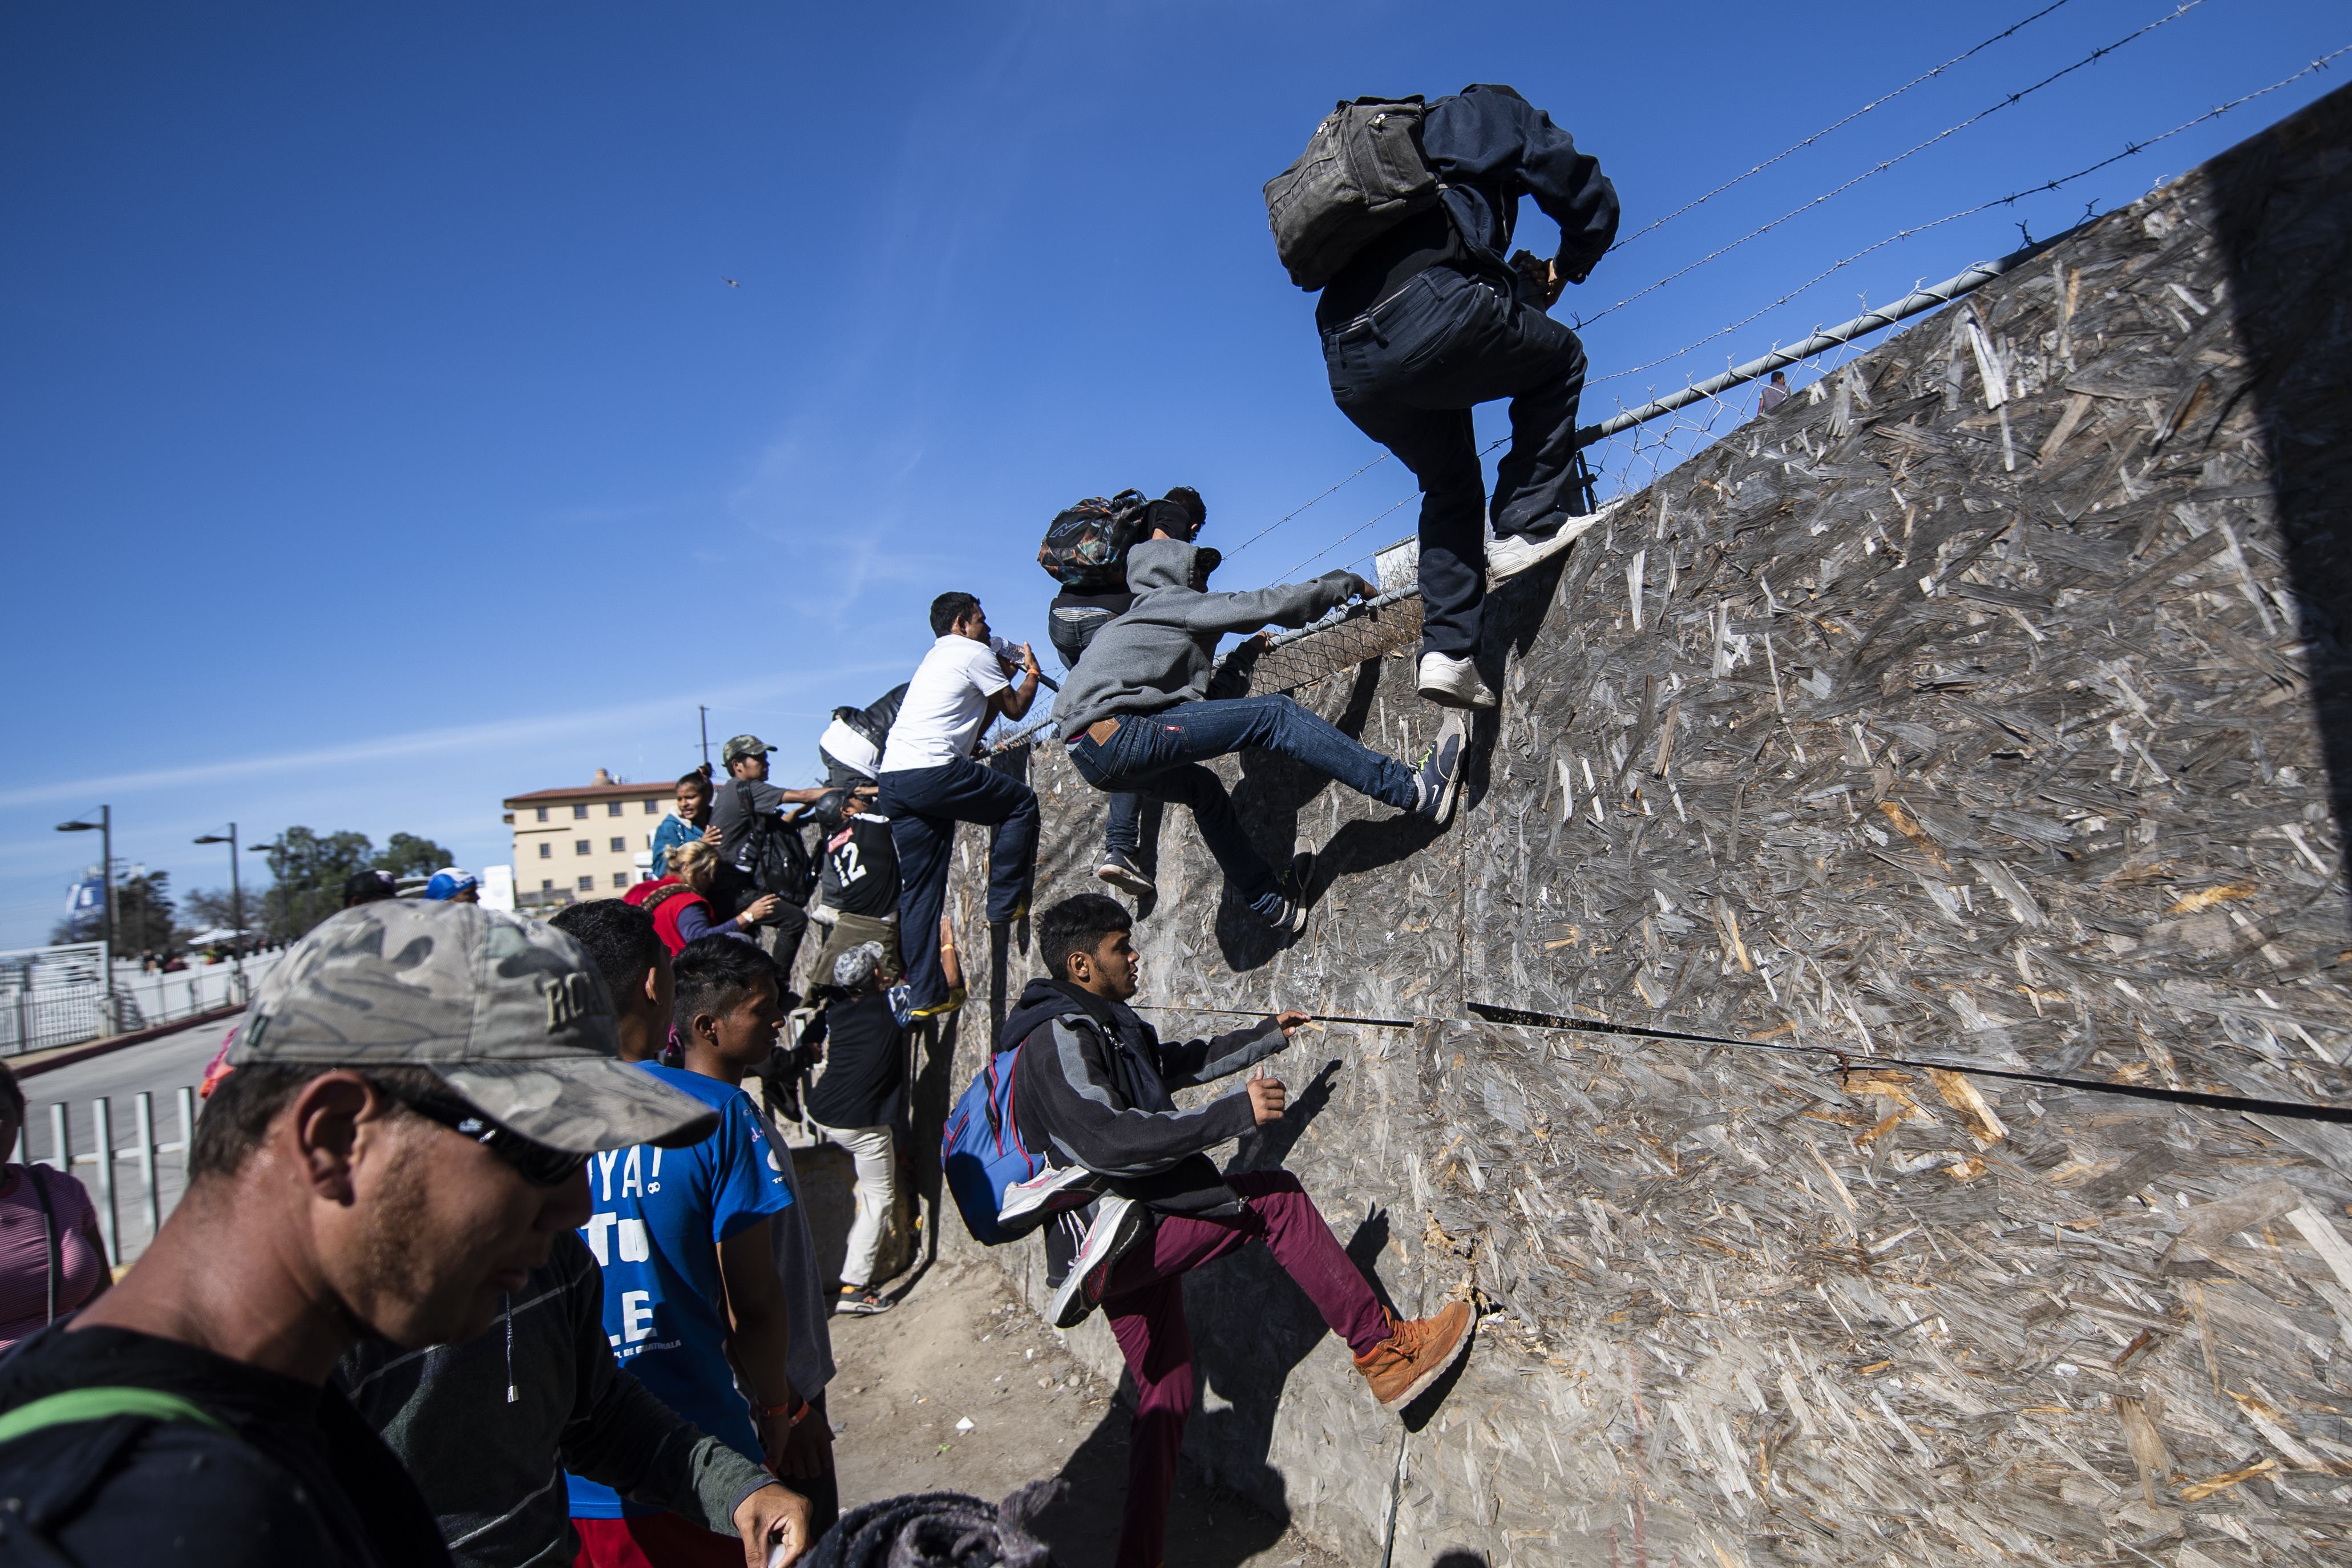 TOPSHOT - A group of Central American migrants -mostly from Honduras- get over a fence as they try to reach the US-Mexico border near the El Chaparral border crossing in Tijuana, Baja California State, Mexico, on November 25, 2018. - US officials closed the San Ysidro crossing point in southern California on Sunday after hundreds of migrants, part of the "caravan" condemned by President Donald Trump, tried to breach a fence from Tijuana, authorities announced. (Photo by Pedro PARDO / AFP) (Photo credit should read PEDRO PARDO/AFP/Getty Images)